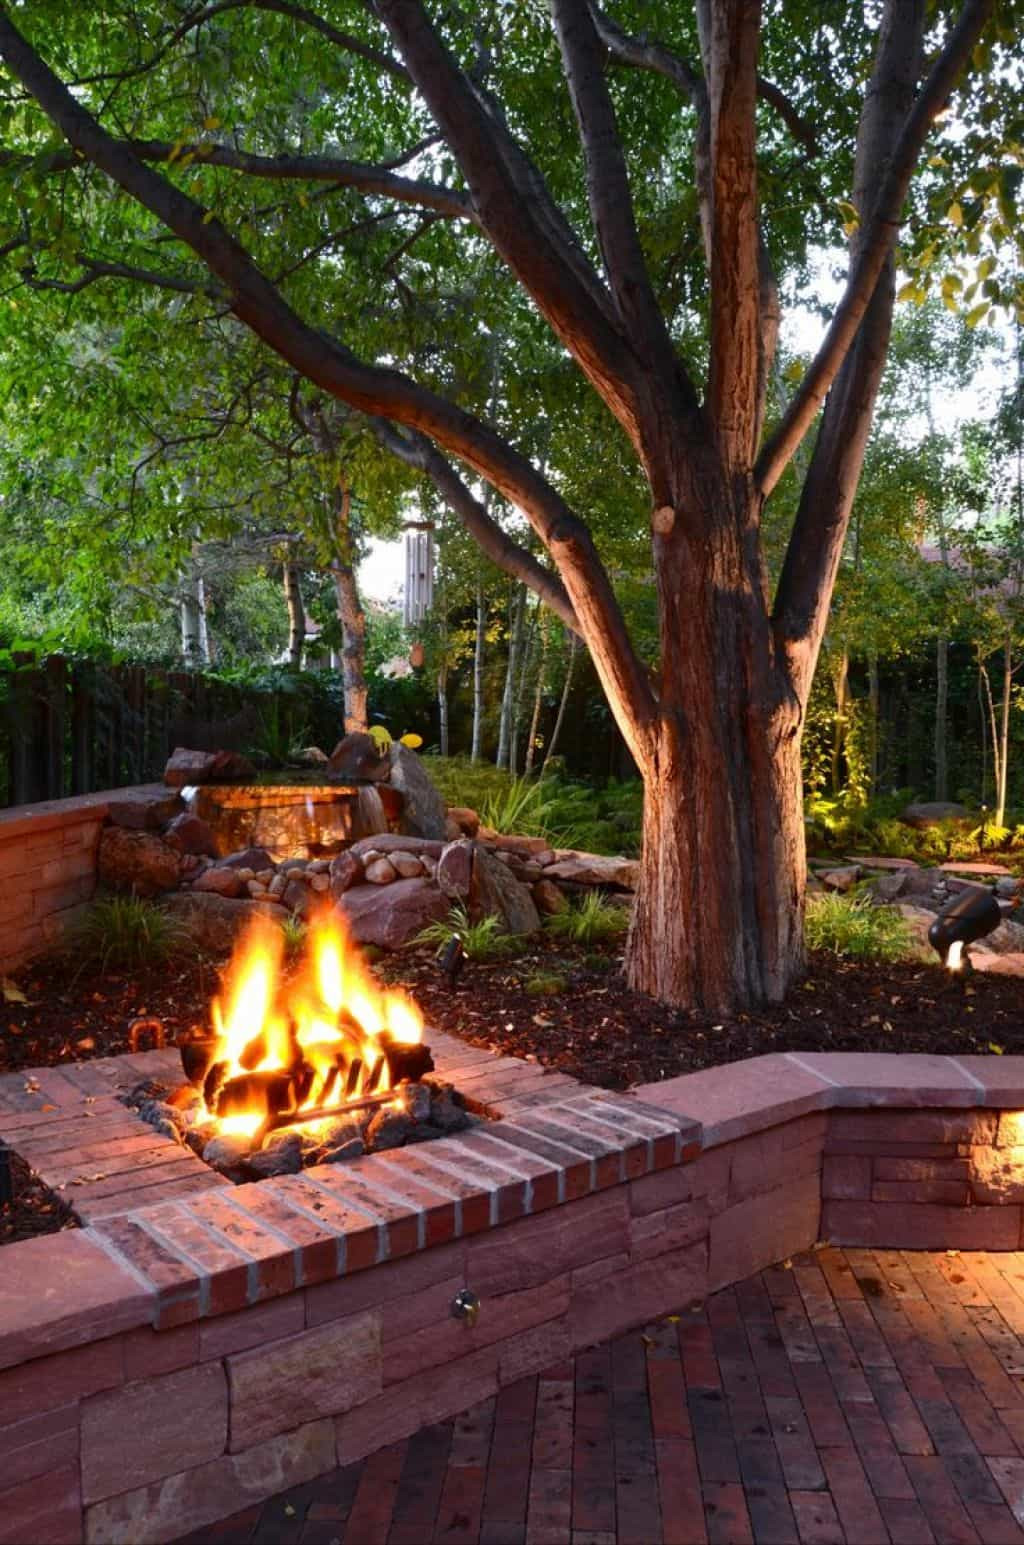 Fire Pits Backyard Landscaping
 Landscaping Around A Fire Pit